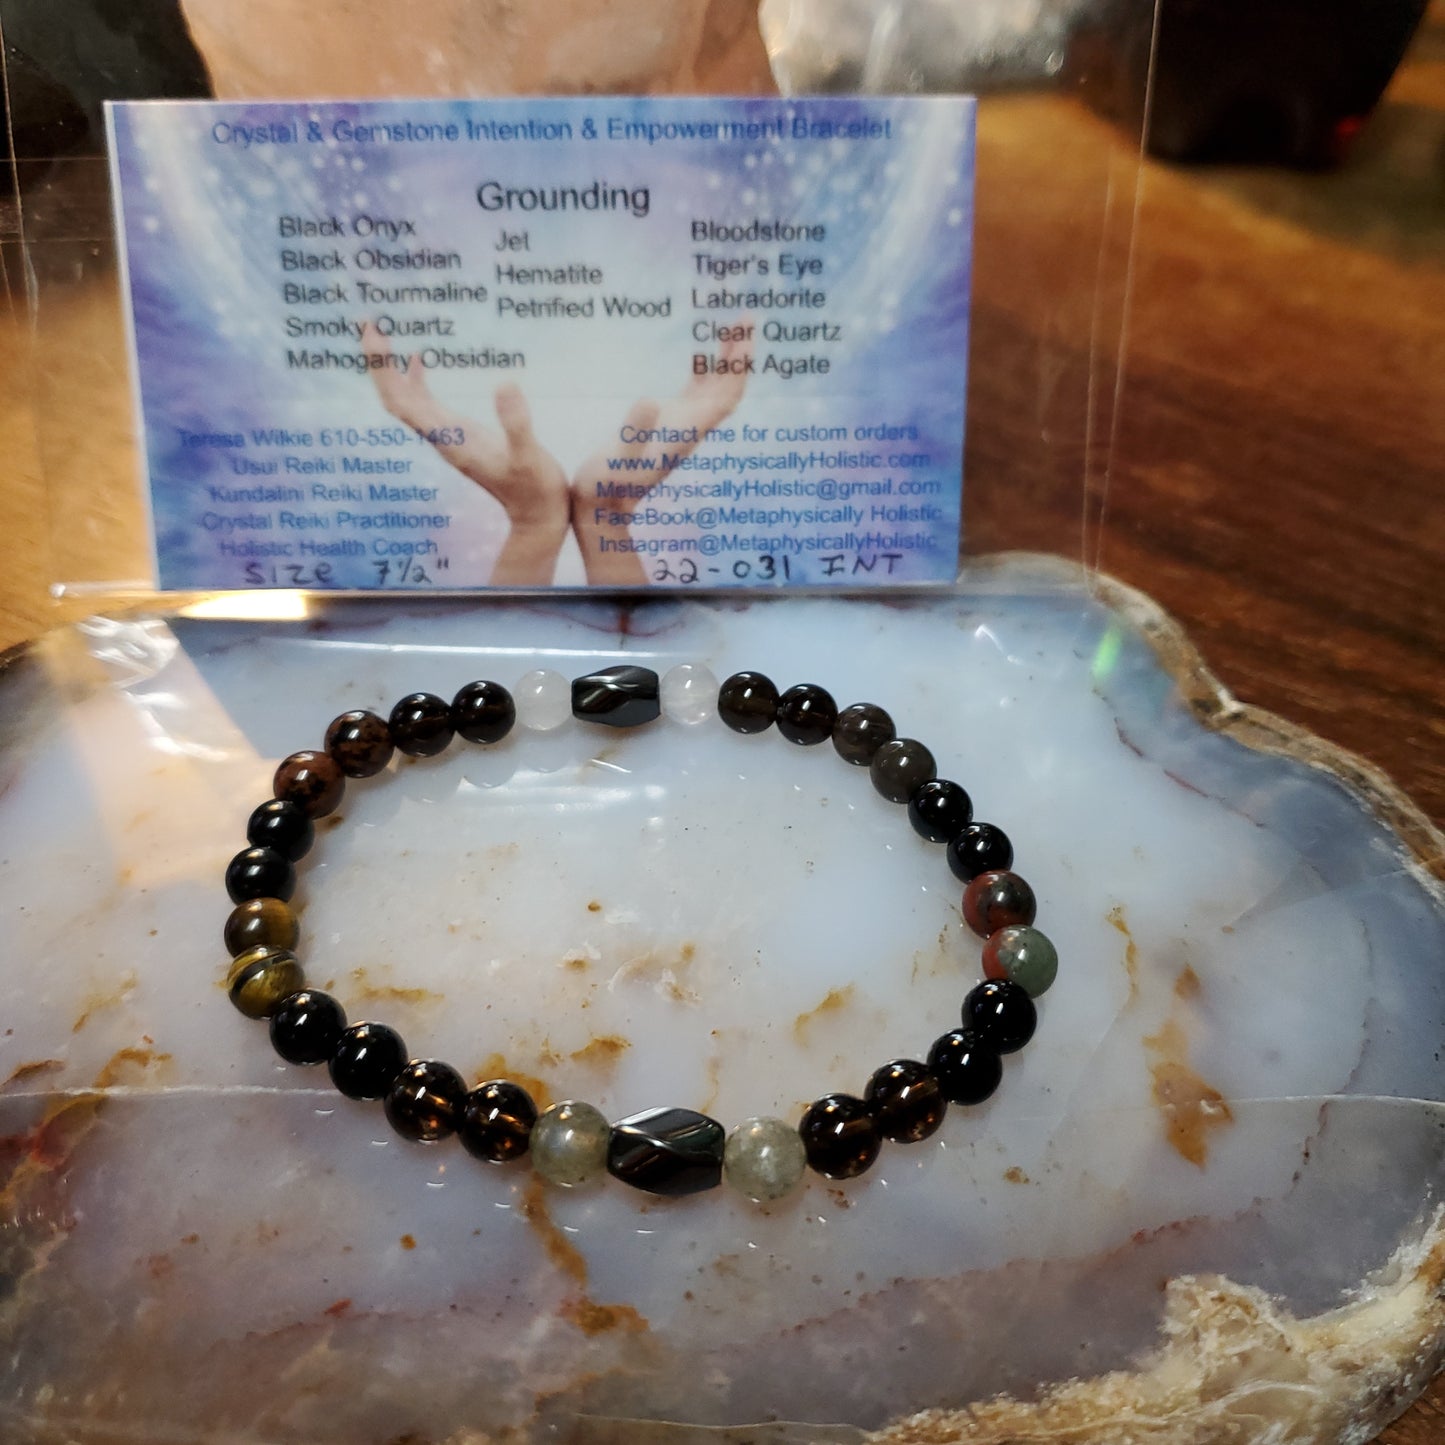 Crystal & Gemstone Beaded Intention and Empowerment Bracelets